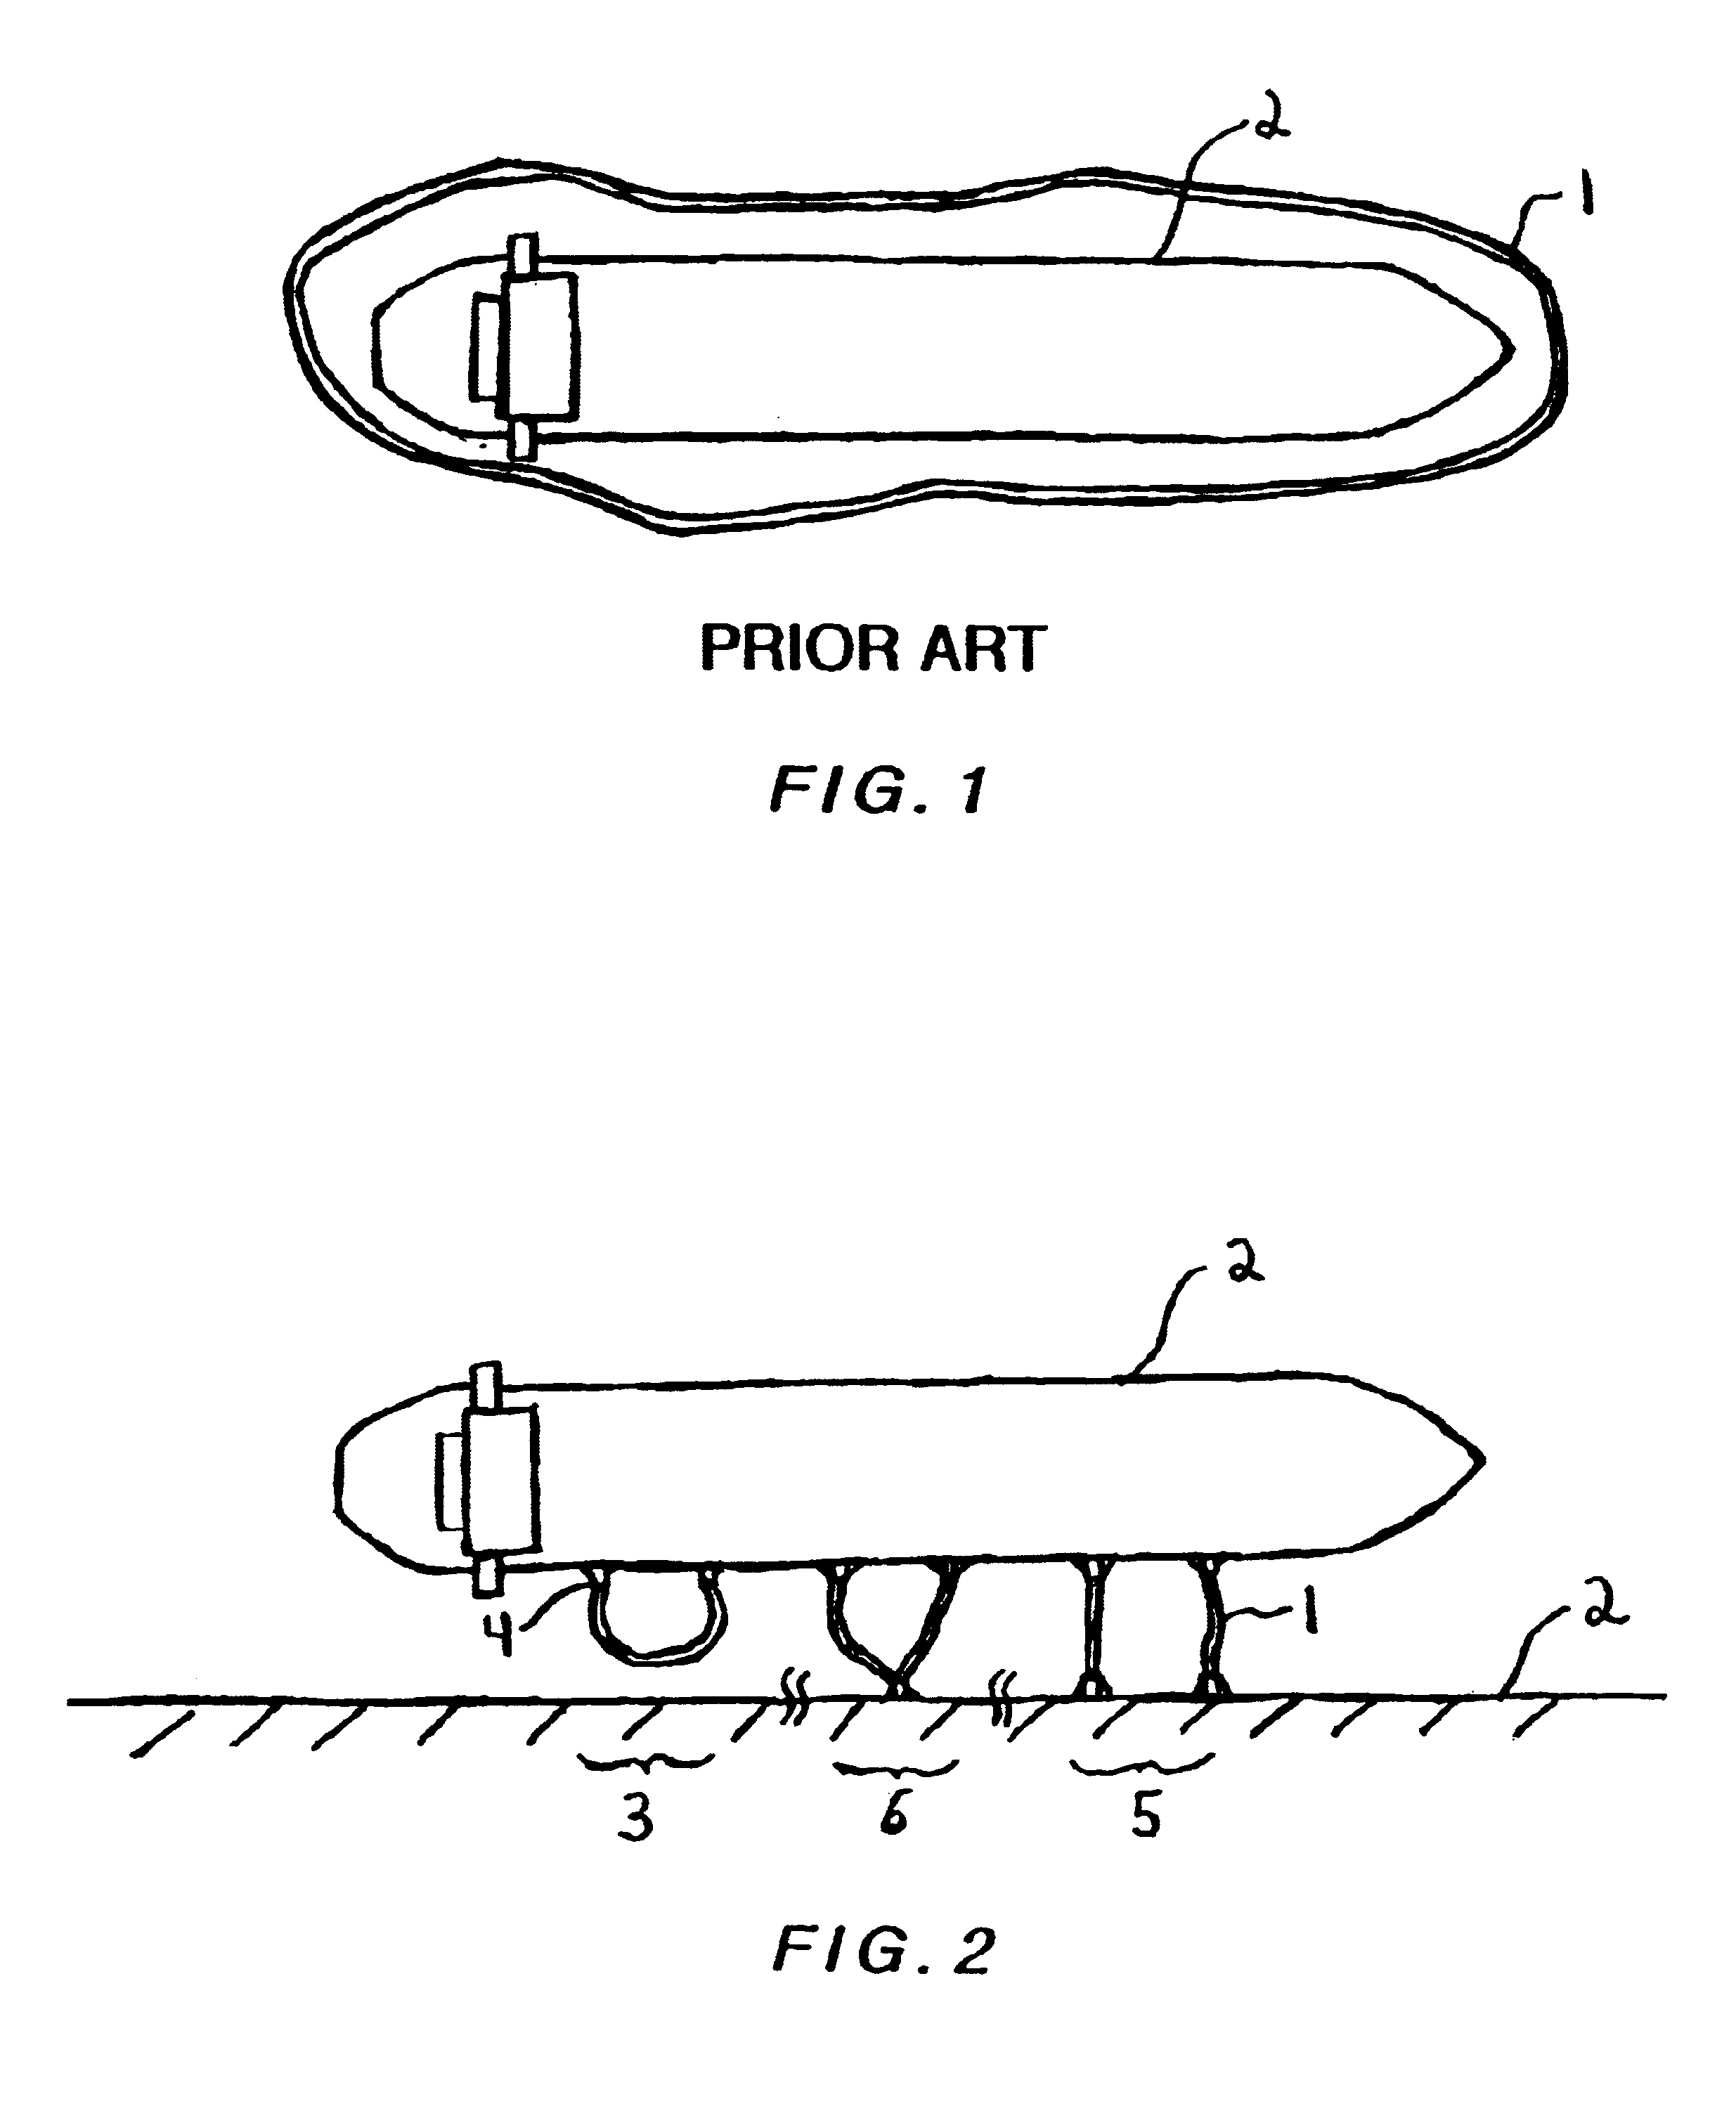 Method, system, and device for deploying a containment boom